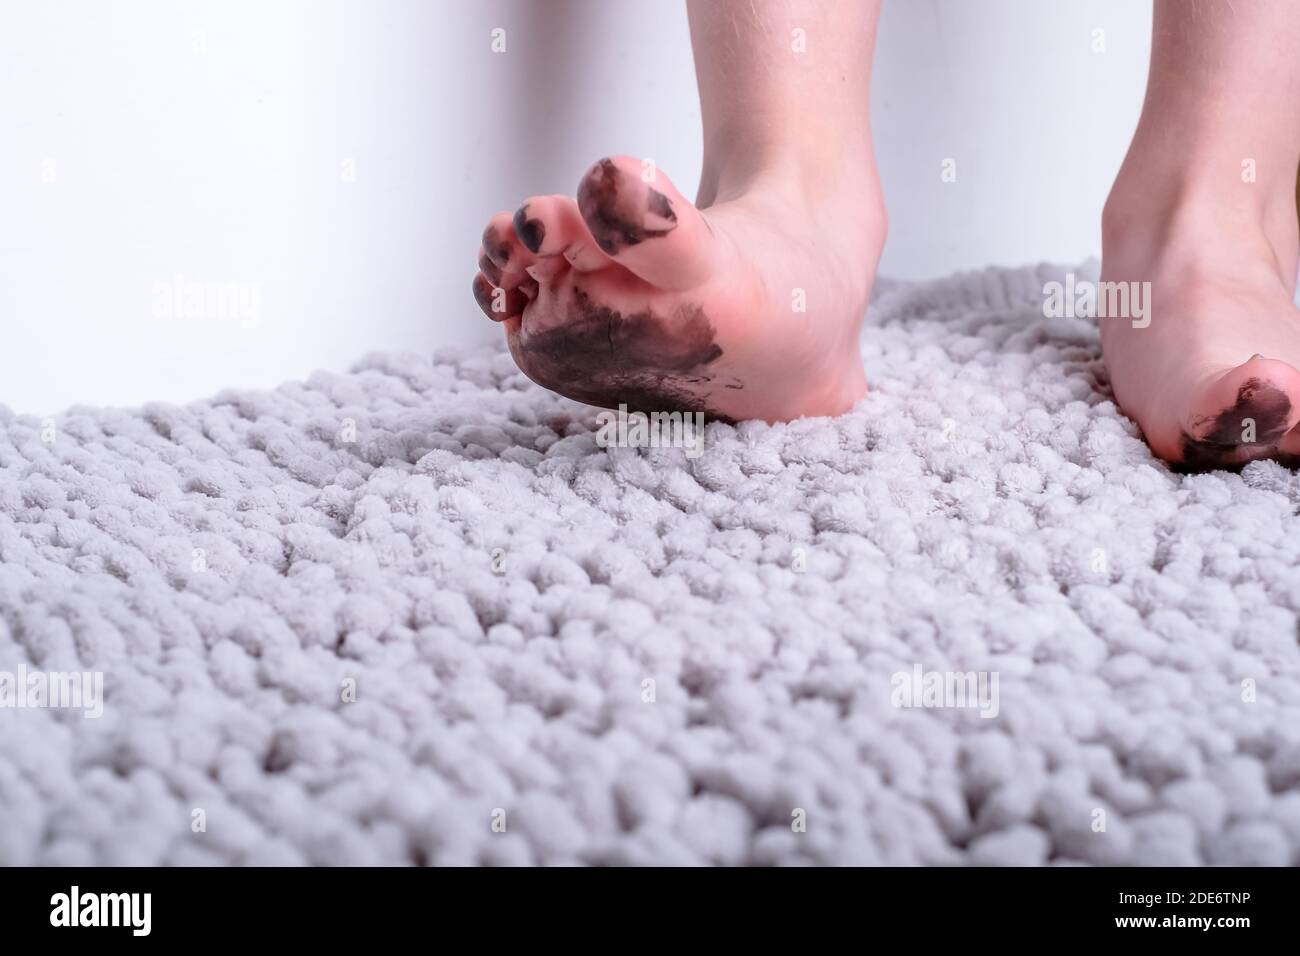 Close up of dirty barefoot of child on mat. place for text. daily life dirty stain for wash and clean concept Stock Photo